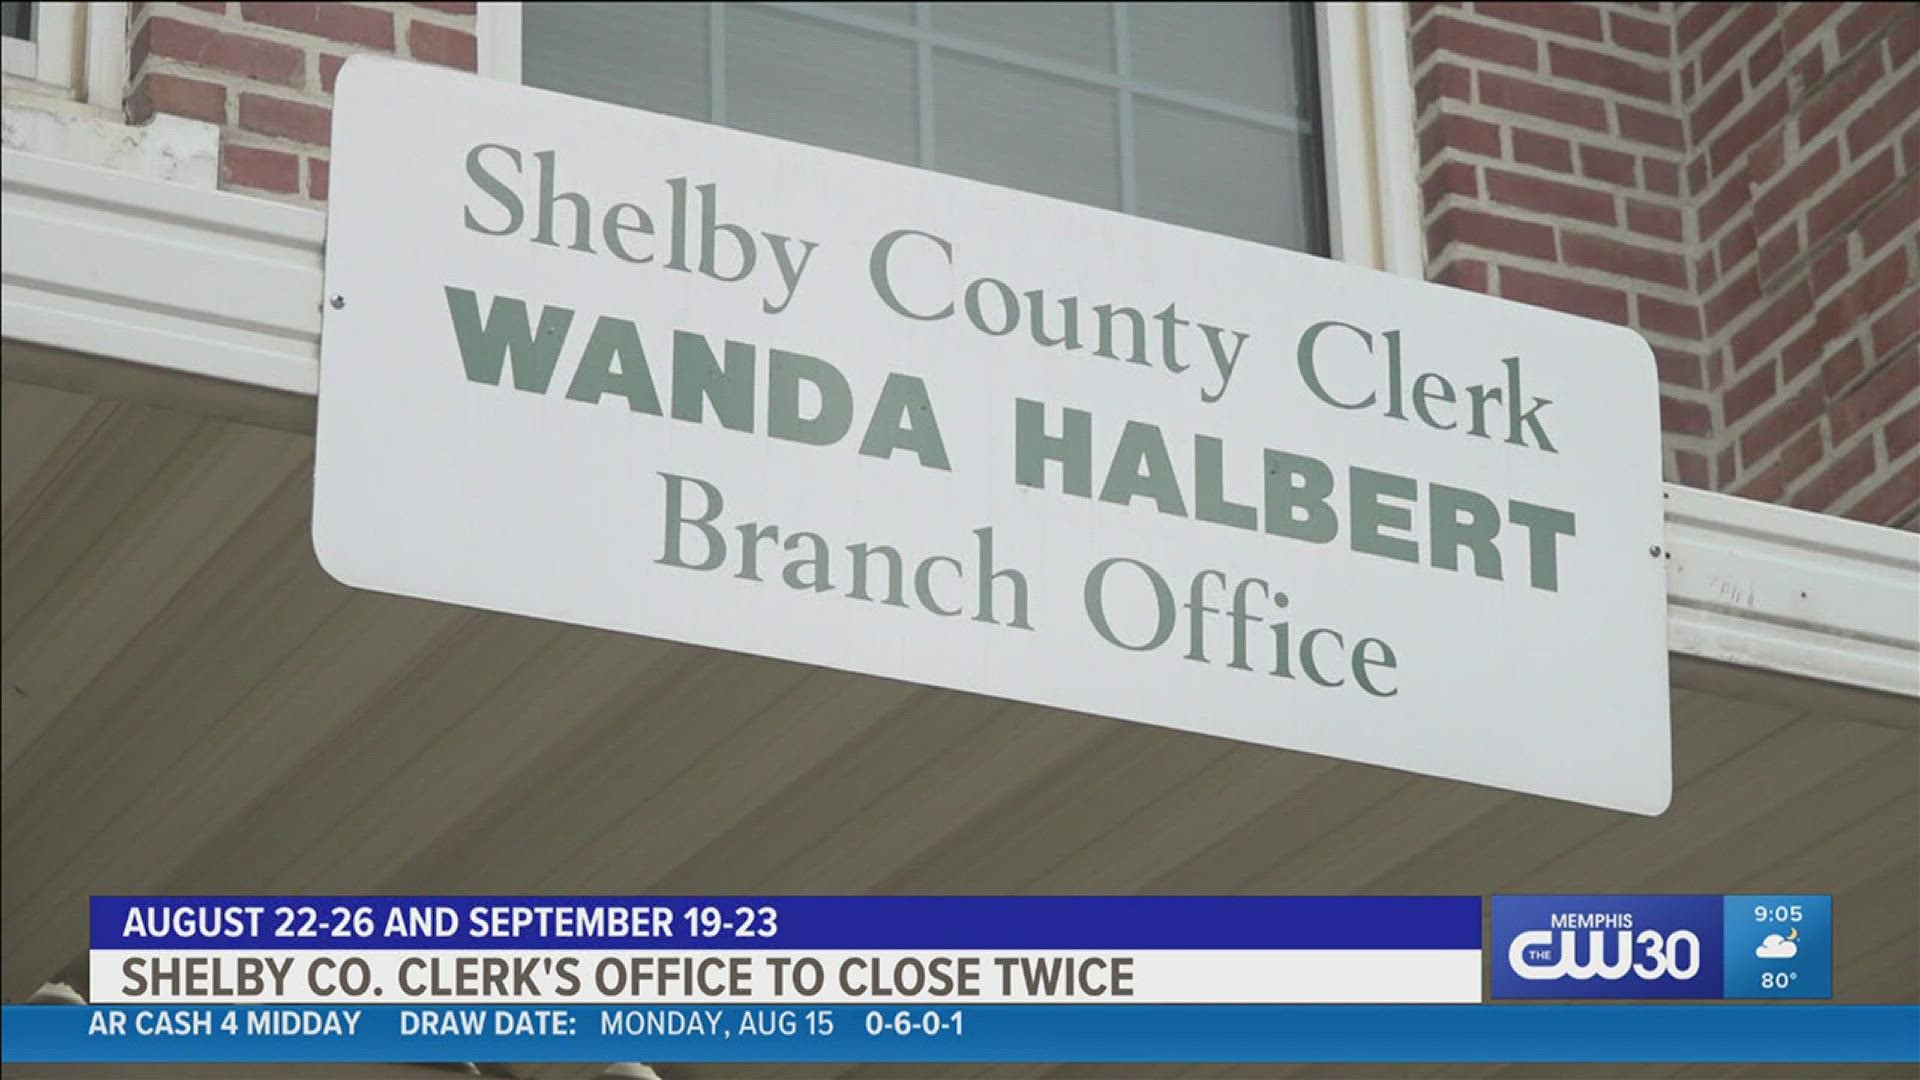 Wanda Halbert said the Offices of the Shelby County Clerk will be closed August 22 through 26 and September 19 through 23, 2022.